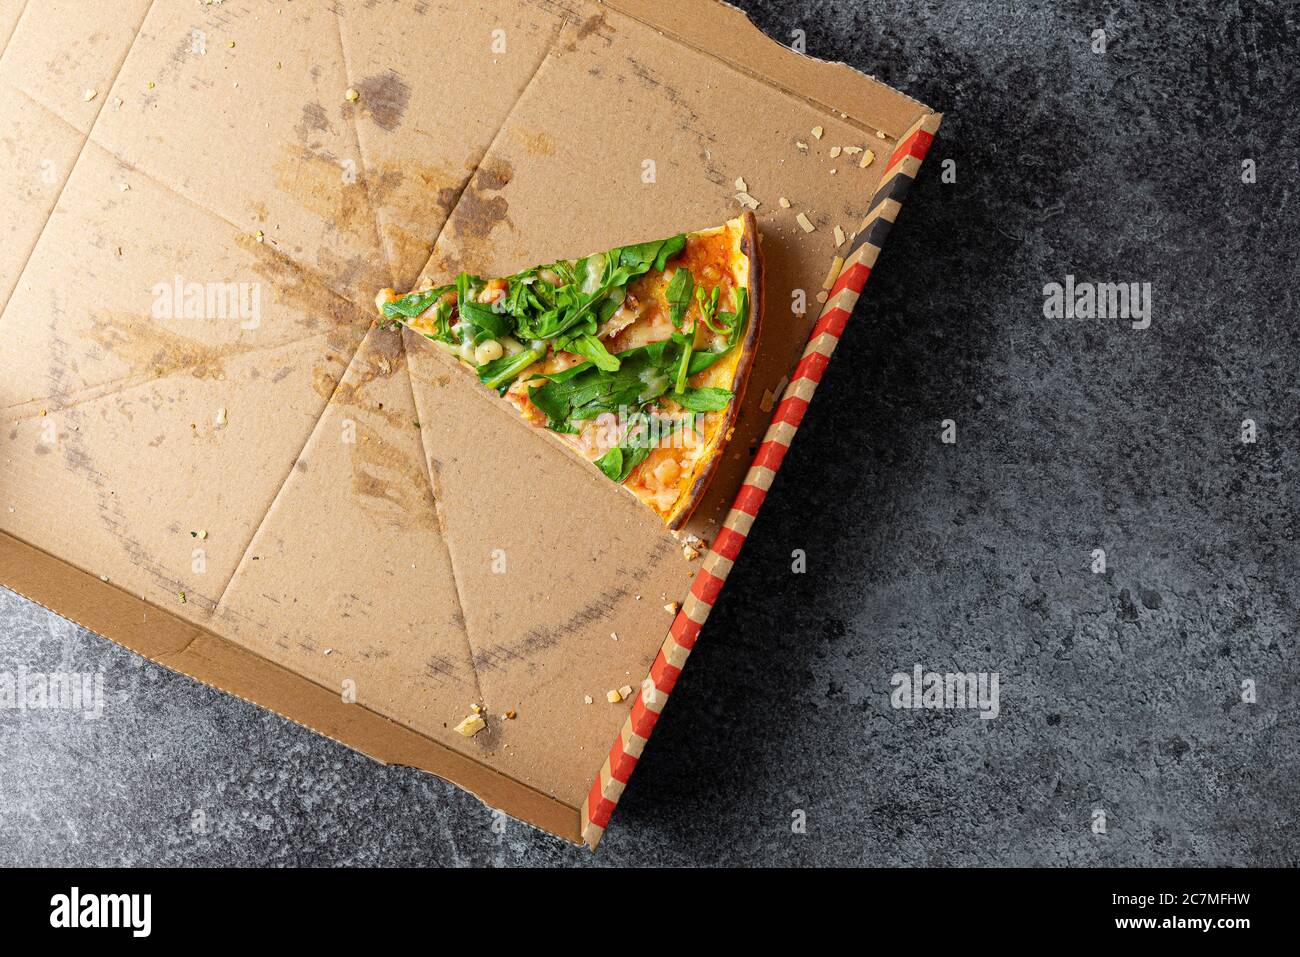 above view of last slice of pizza in cardboard box on stone kitchen counter Stock Photo